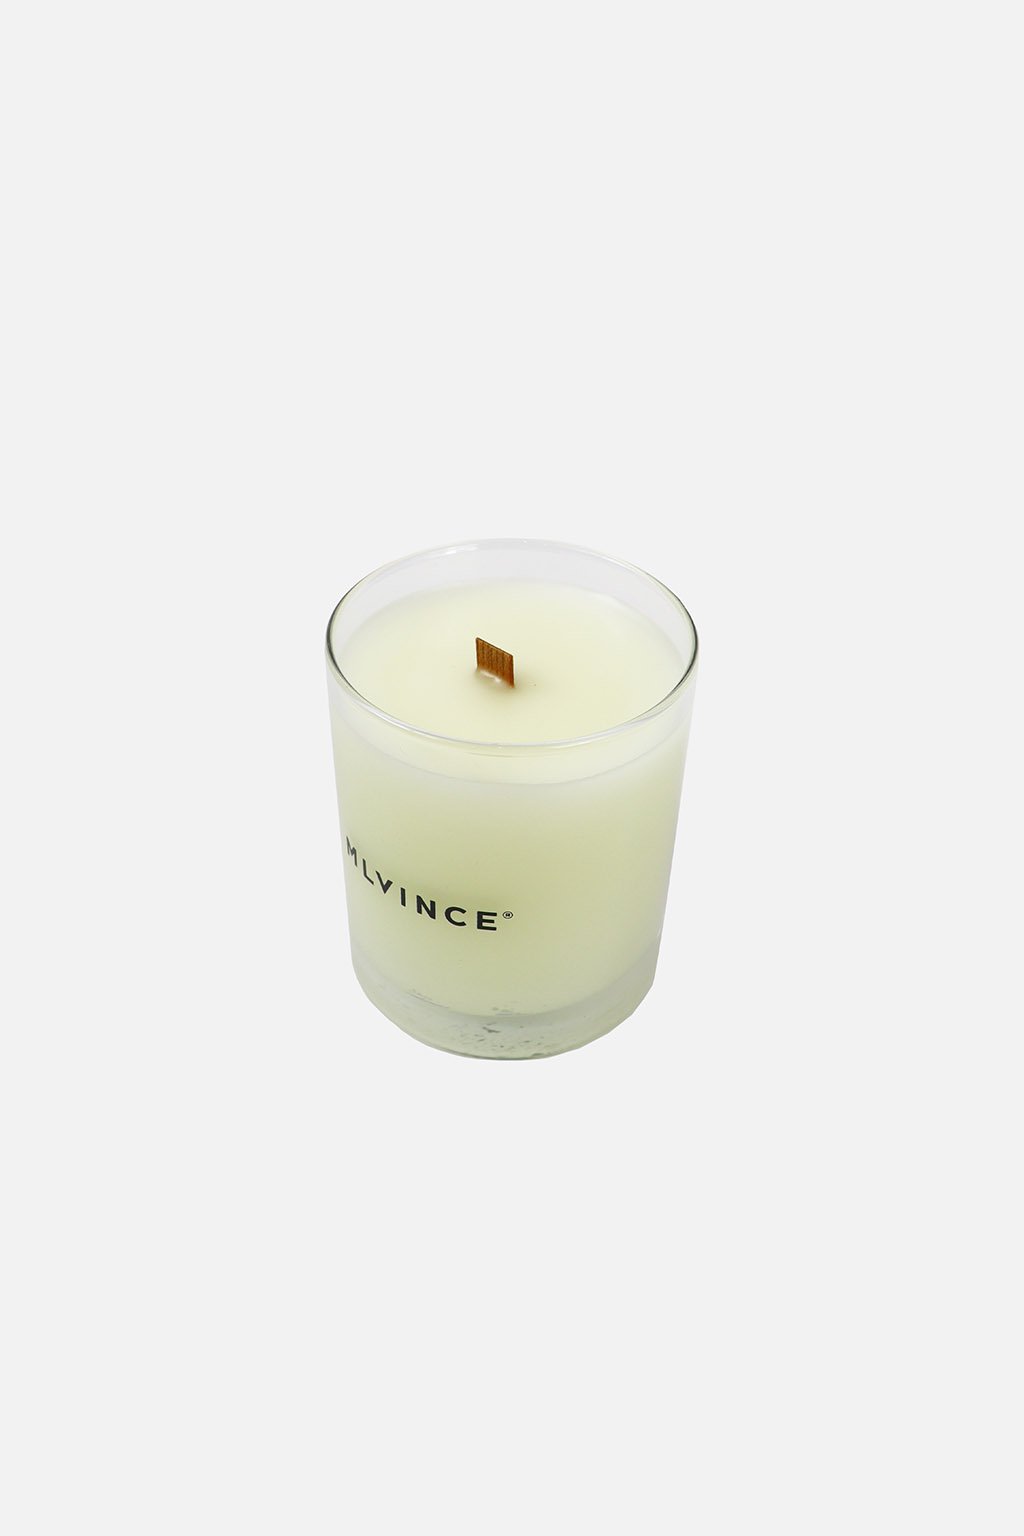 30%OFF MLVINCE (メルヴィンス)｜CANDLE MANGO